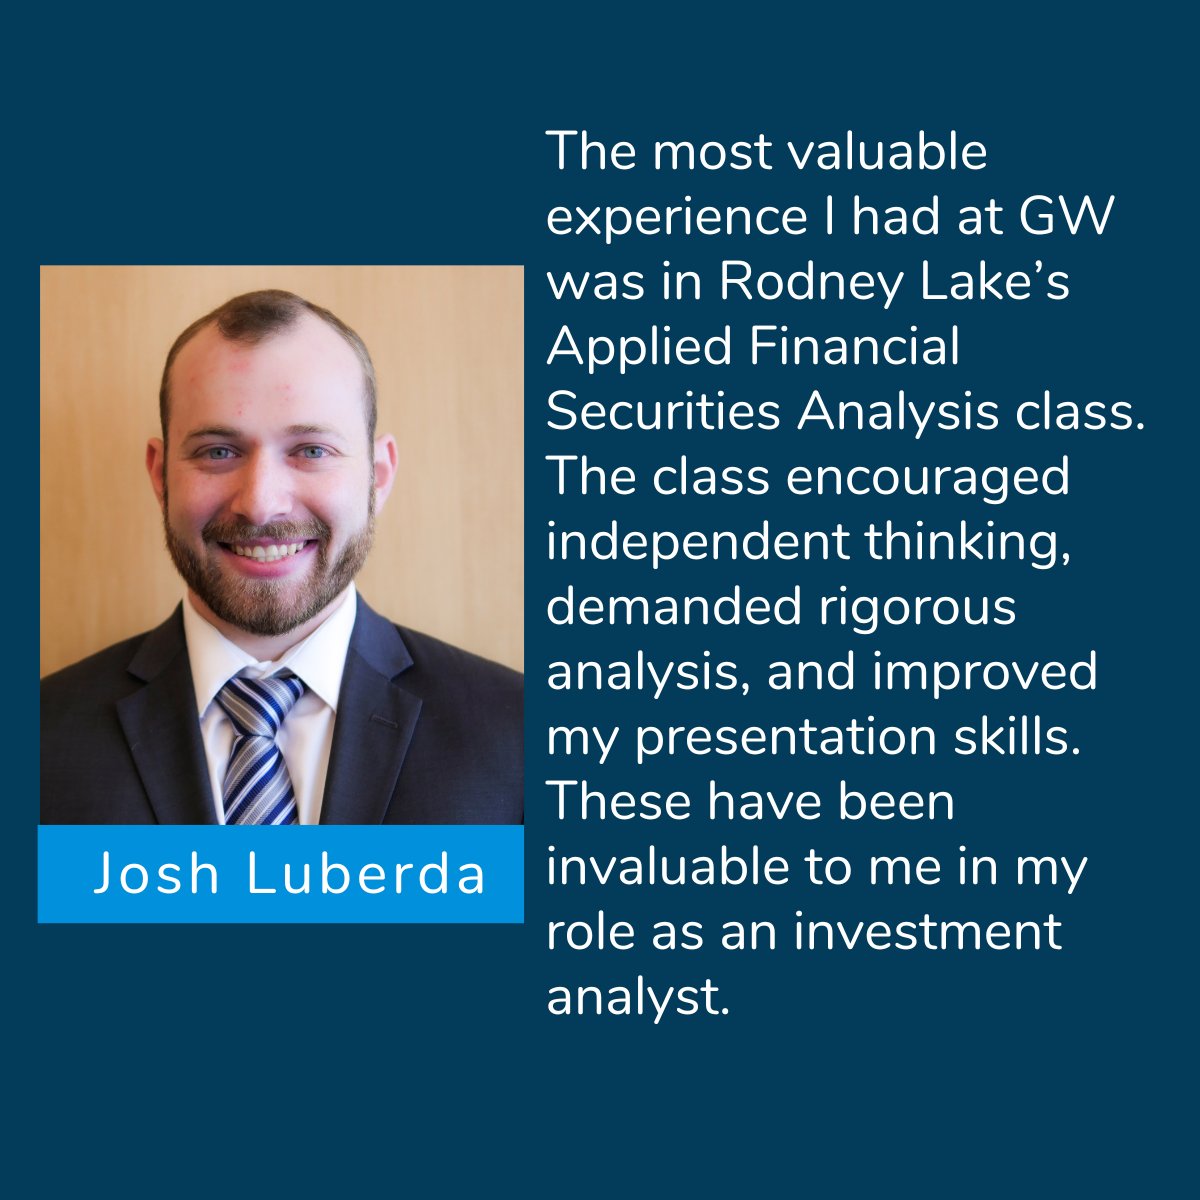 #GWGivingDay is next week! 
Check out a message from our #alumniadvocate Josh Luberda. Josh was enrolled in 3 classes with the @gw_investment during his time @GWtweets.
He is an Investment Analyst at Cambridge Associates.
Donate today givecampus.com/campaigns/3377…

@GWSBalumni #GWSB